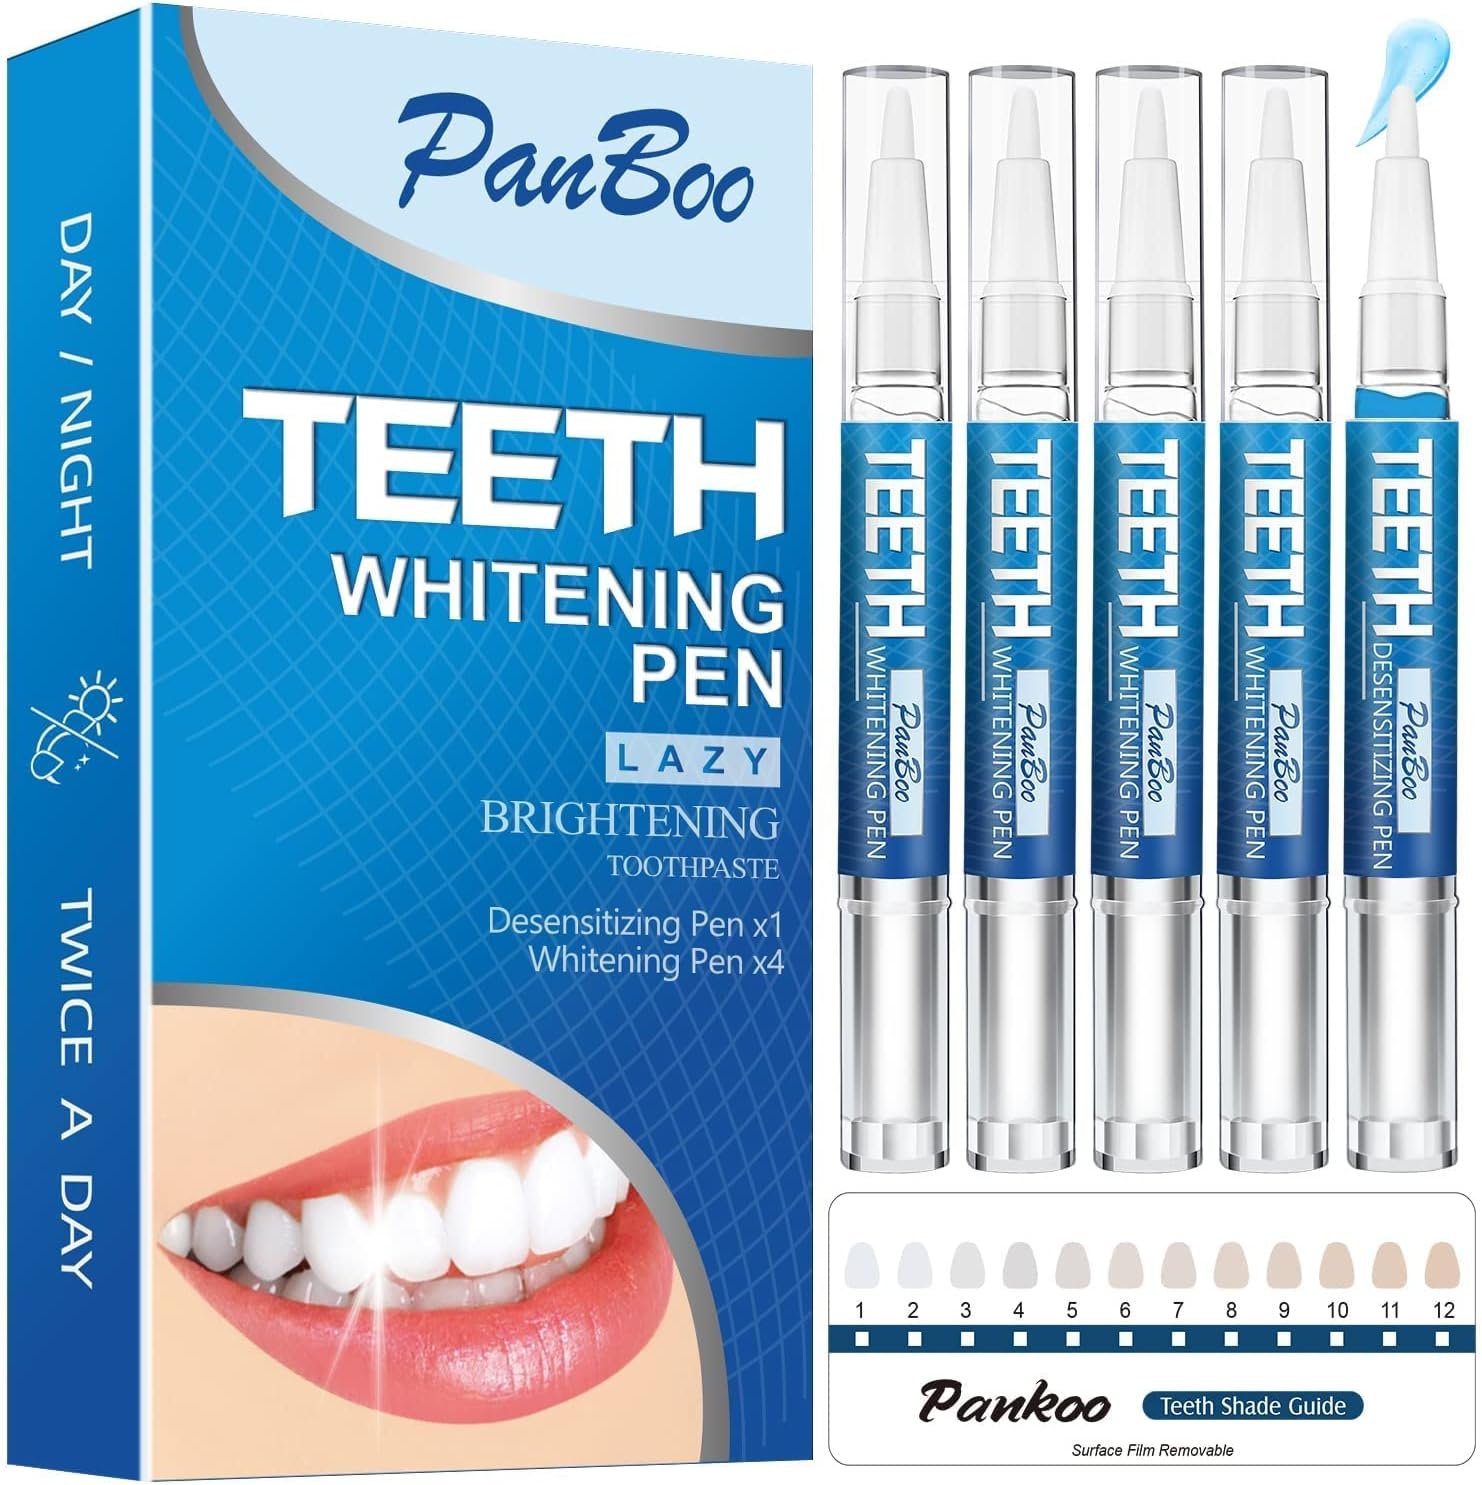 Teeth Whitening Pen 4+1, Use Twice a Day Up to 1-6 Shade Whiter in 1-2 Weeks, 4 Whitening Pens, 1 Desensitising Pen, 70+ Whitening Treatments, Effective, Pain Free and Enamel Safe, Easy to Use at Home